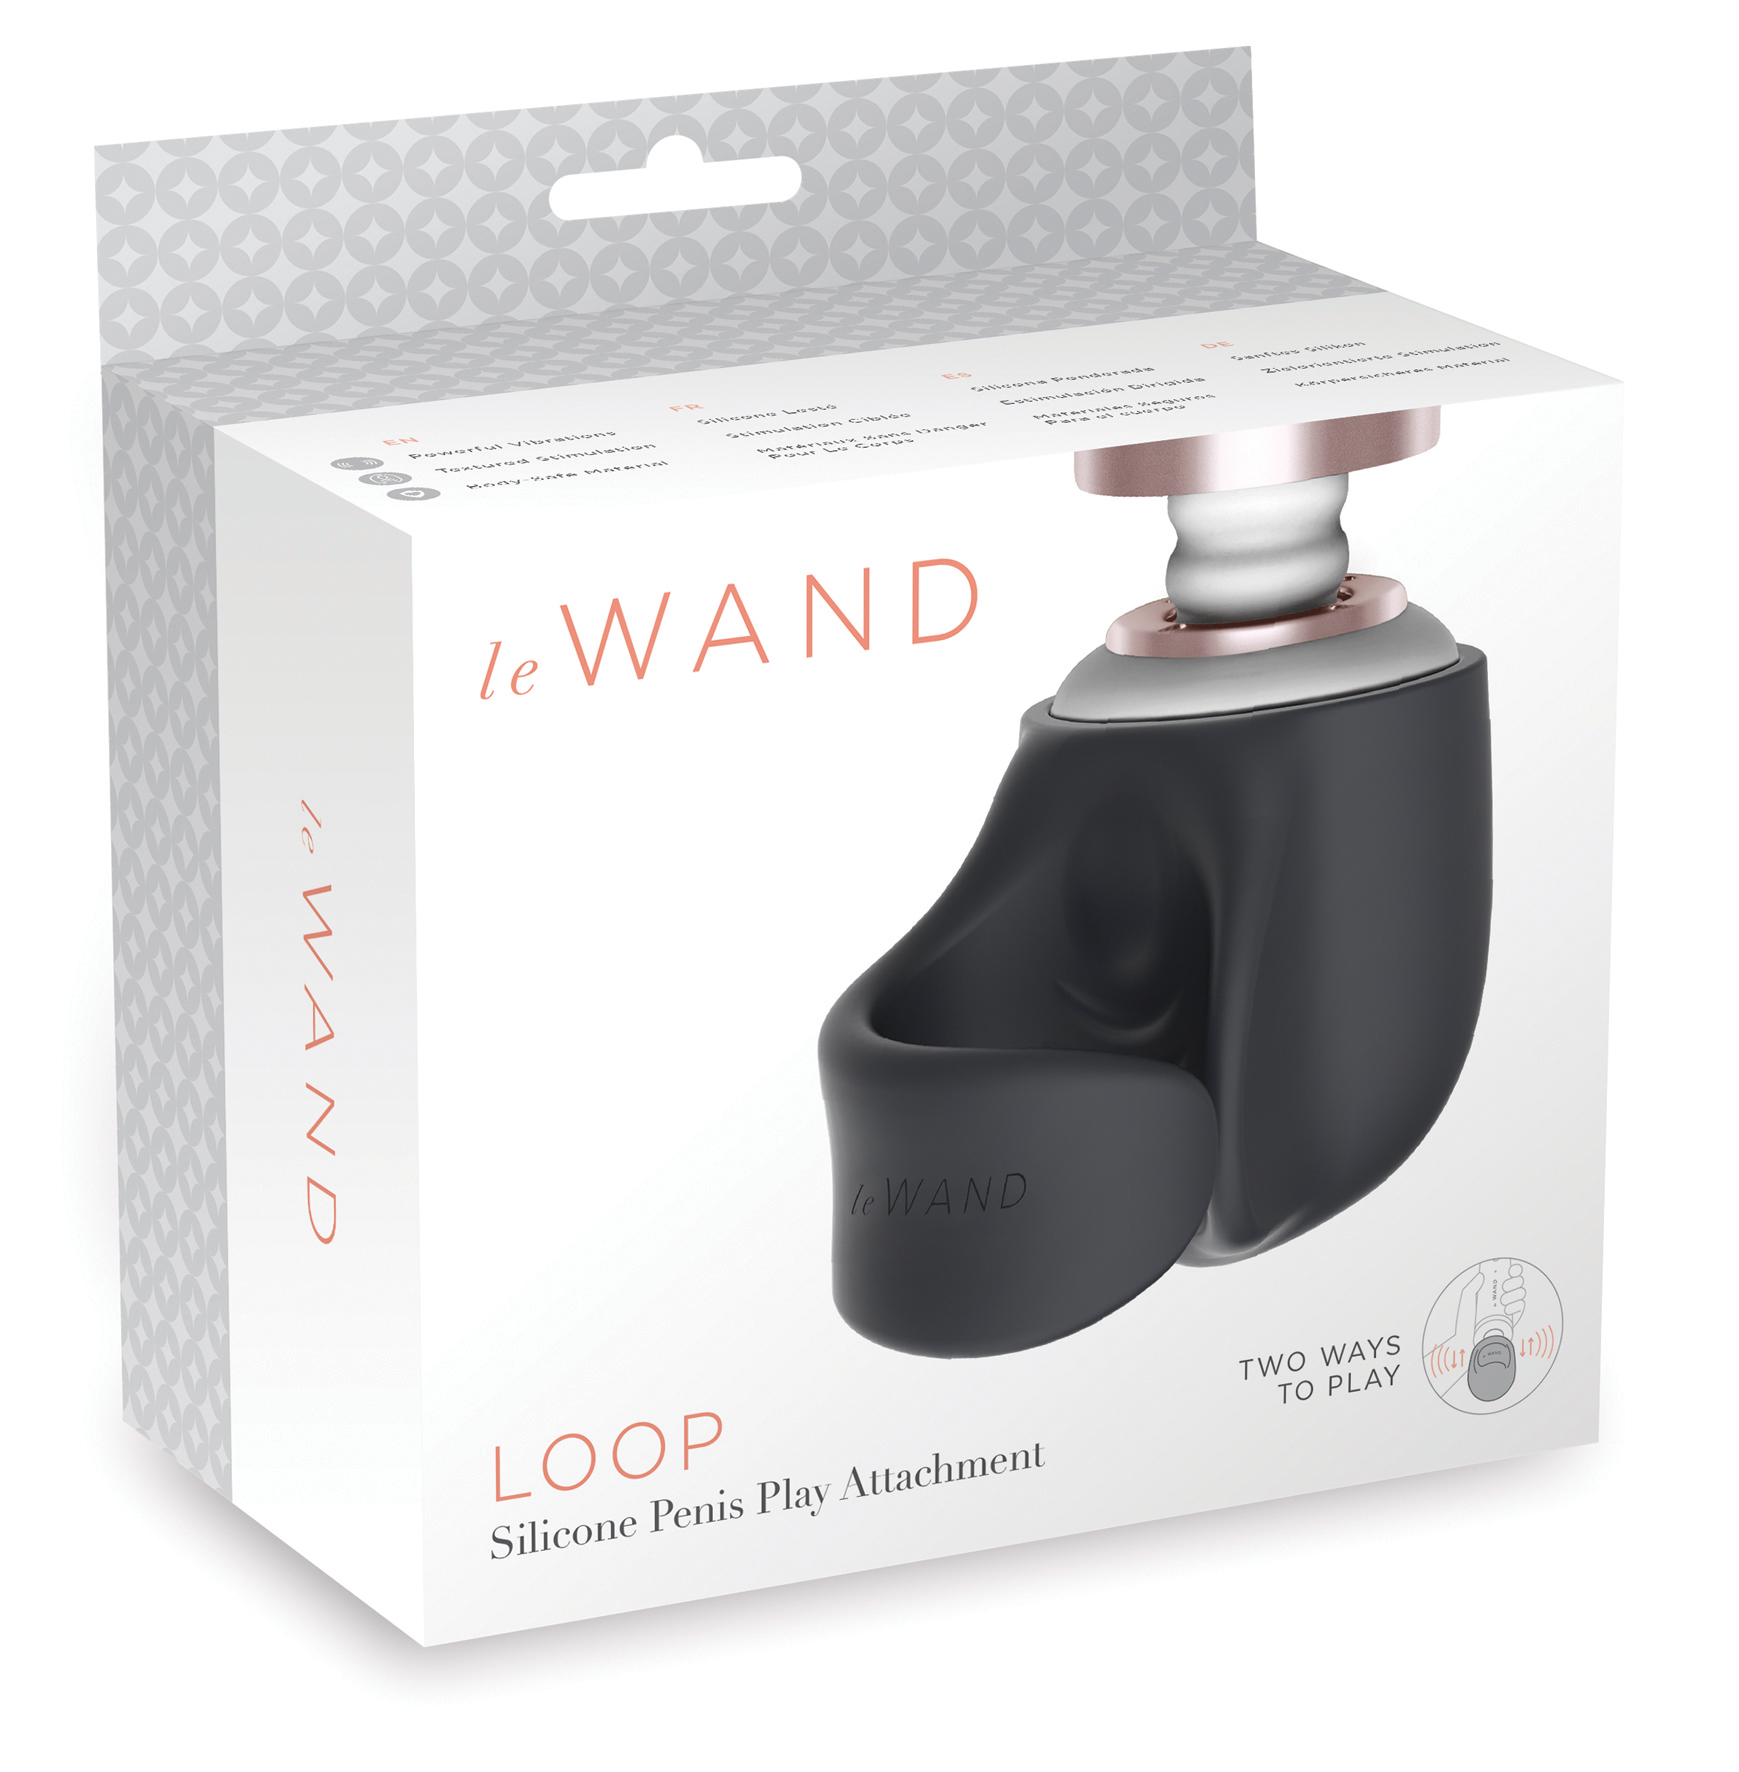 Le Wand Loop Silicone Penis Play Attachment